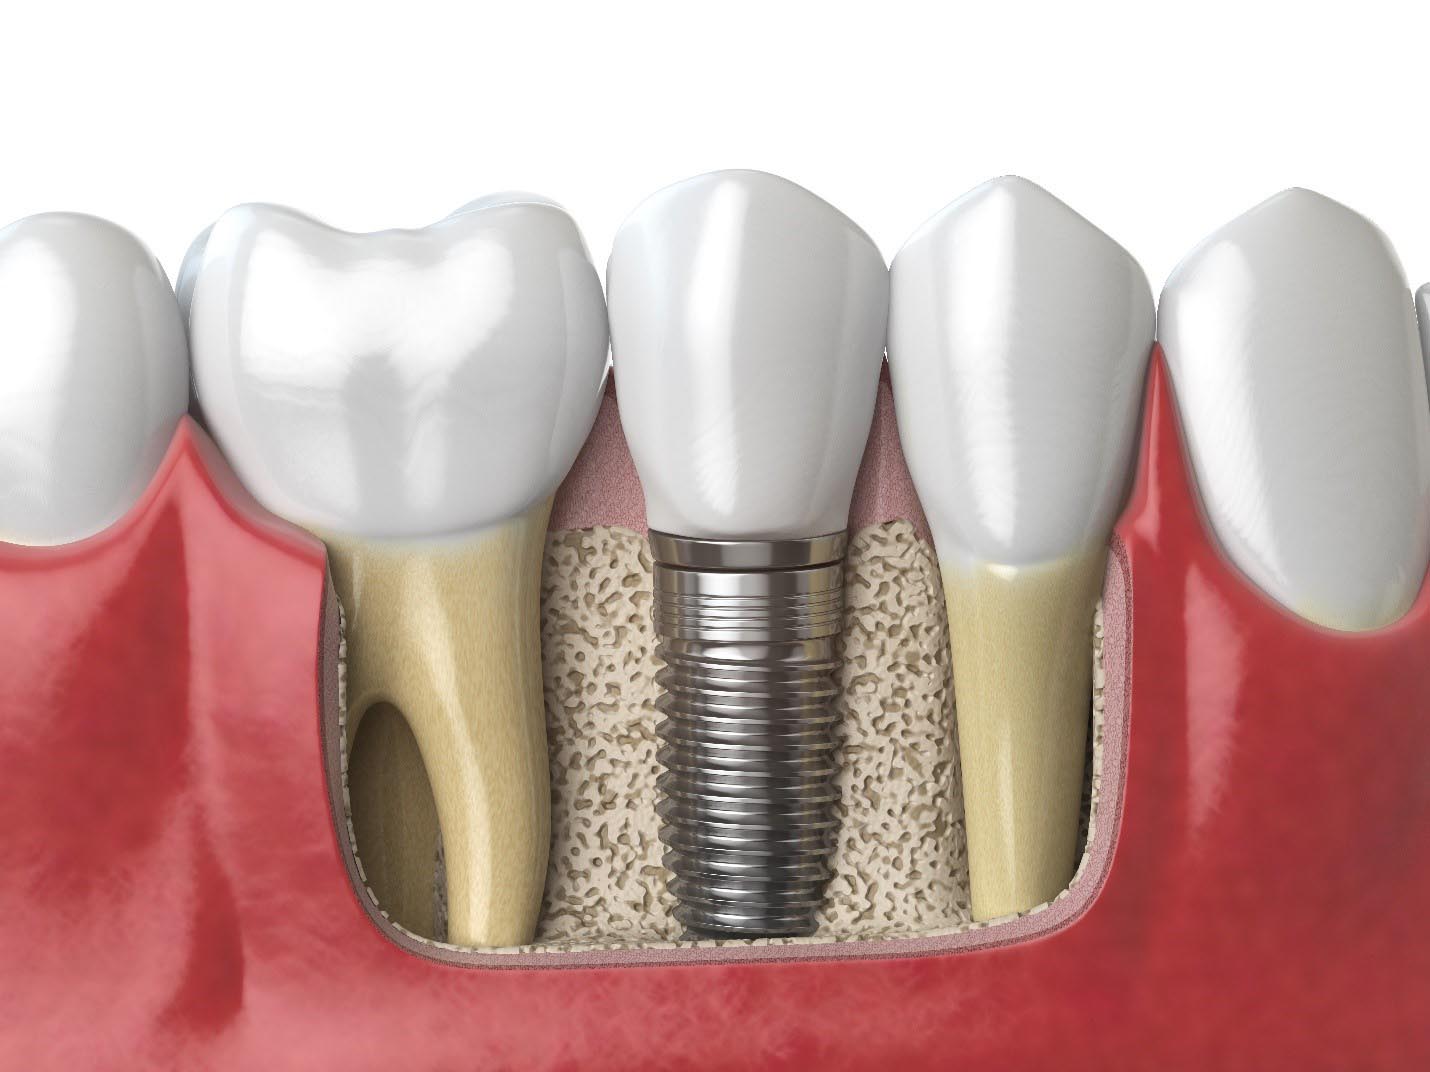 Dental Implants: Costs and What You Need to Know